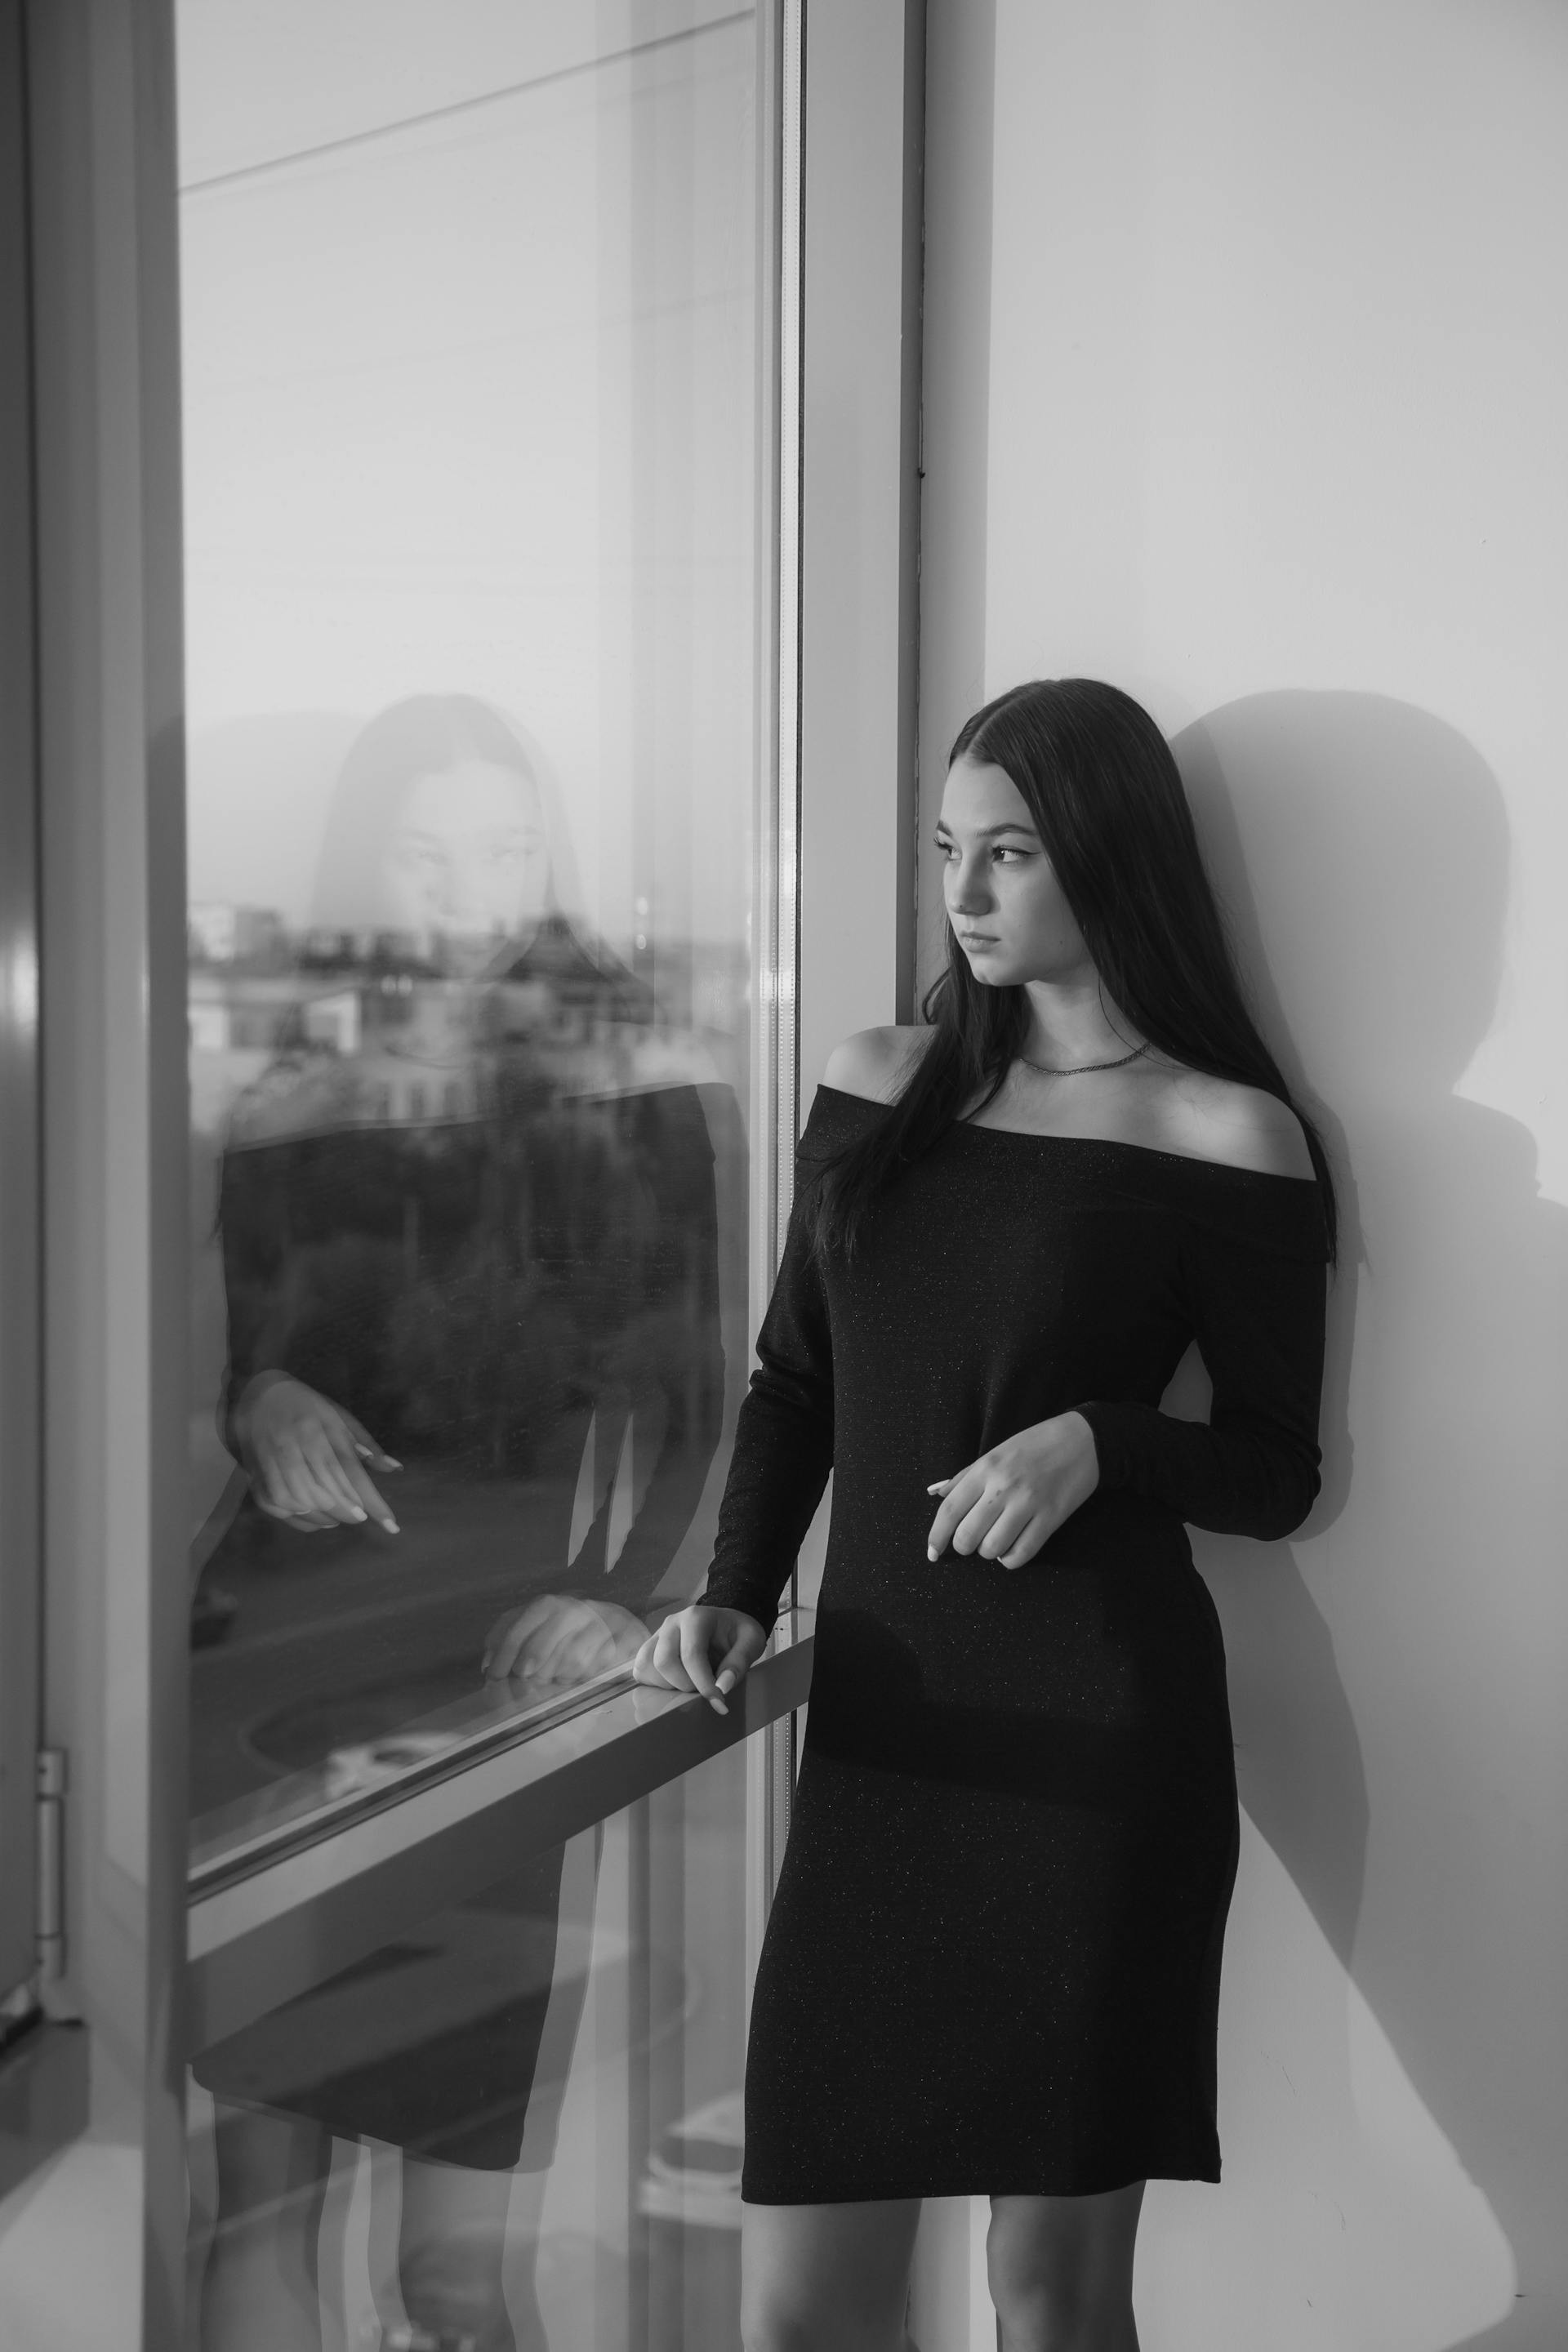 A woman standing next to a window | Source: Pexels